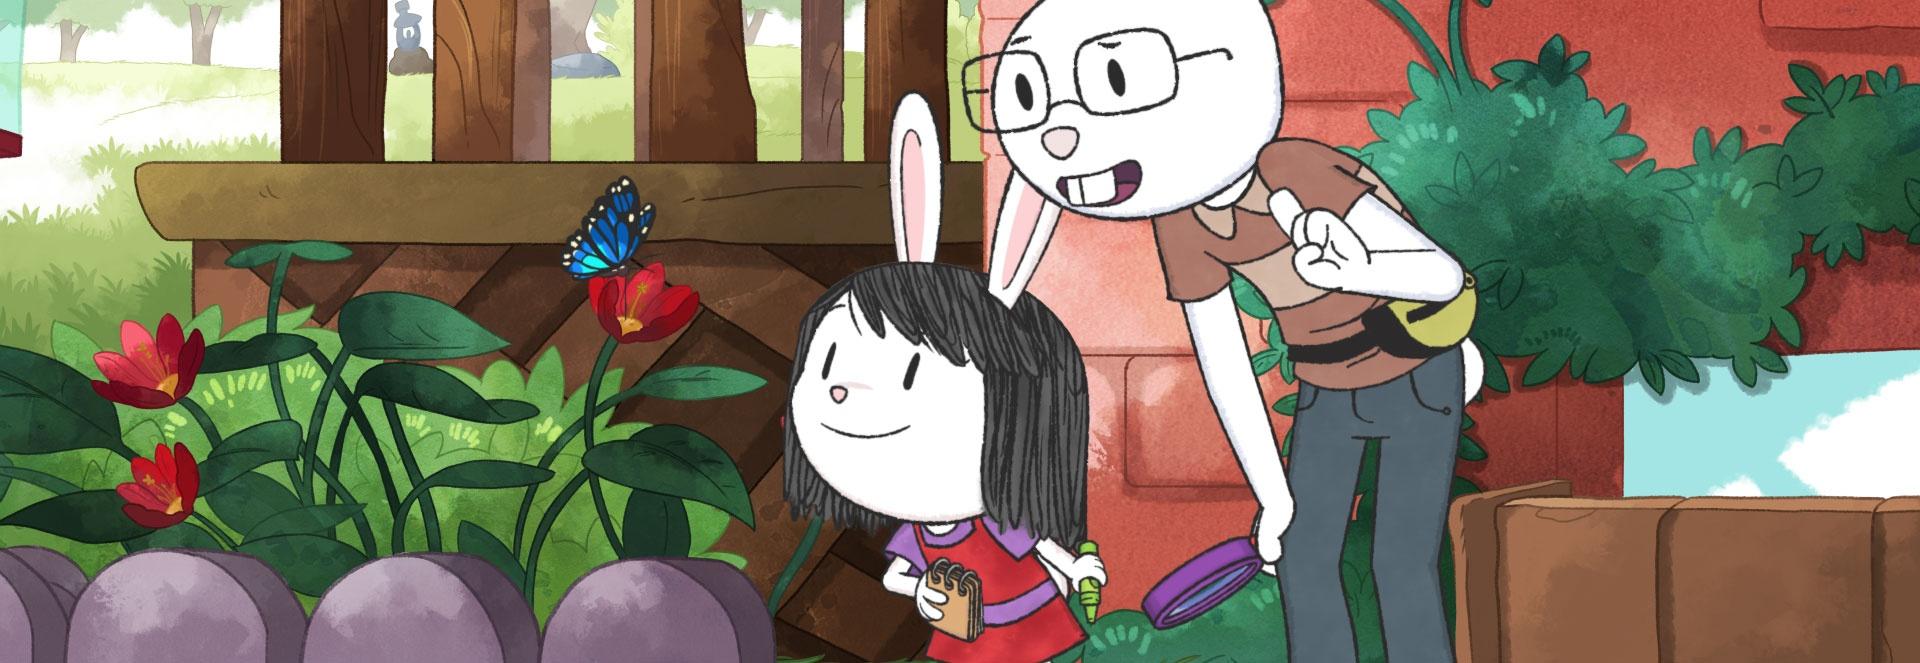 Elinor and her father, both white rabbit animated characters, investigate a butterfly resting atop a red flower.